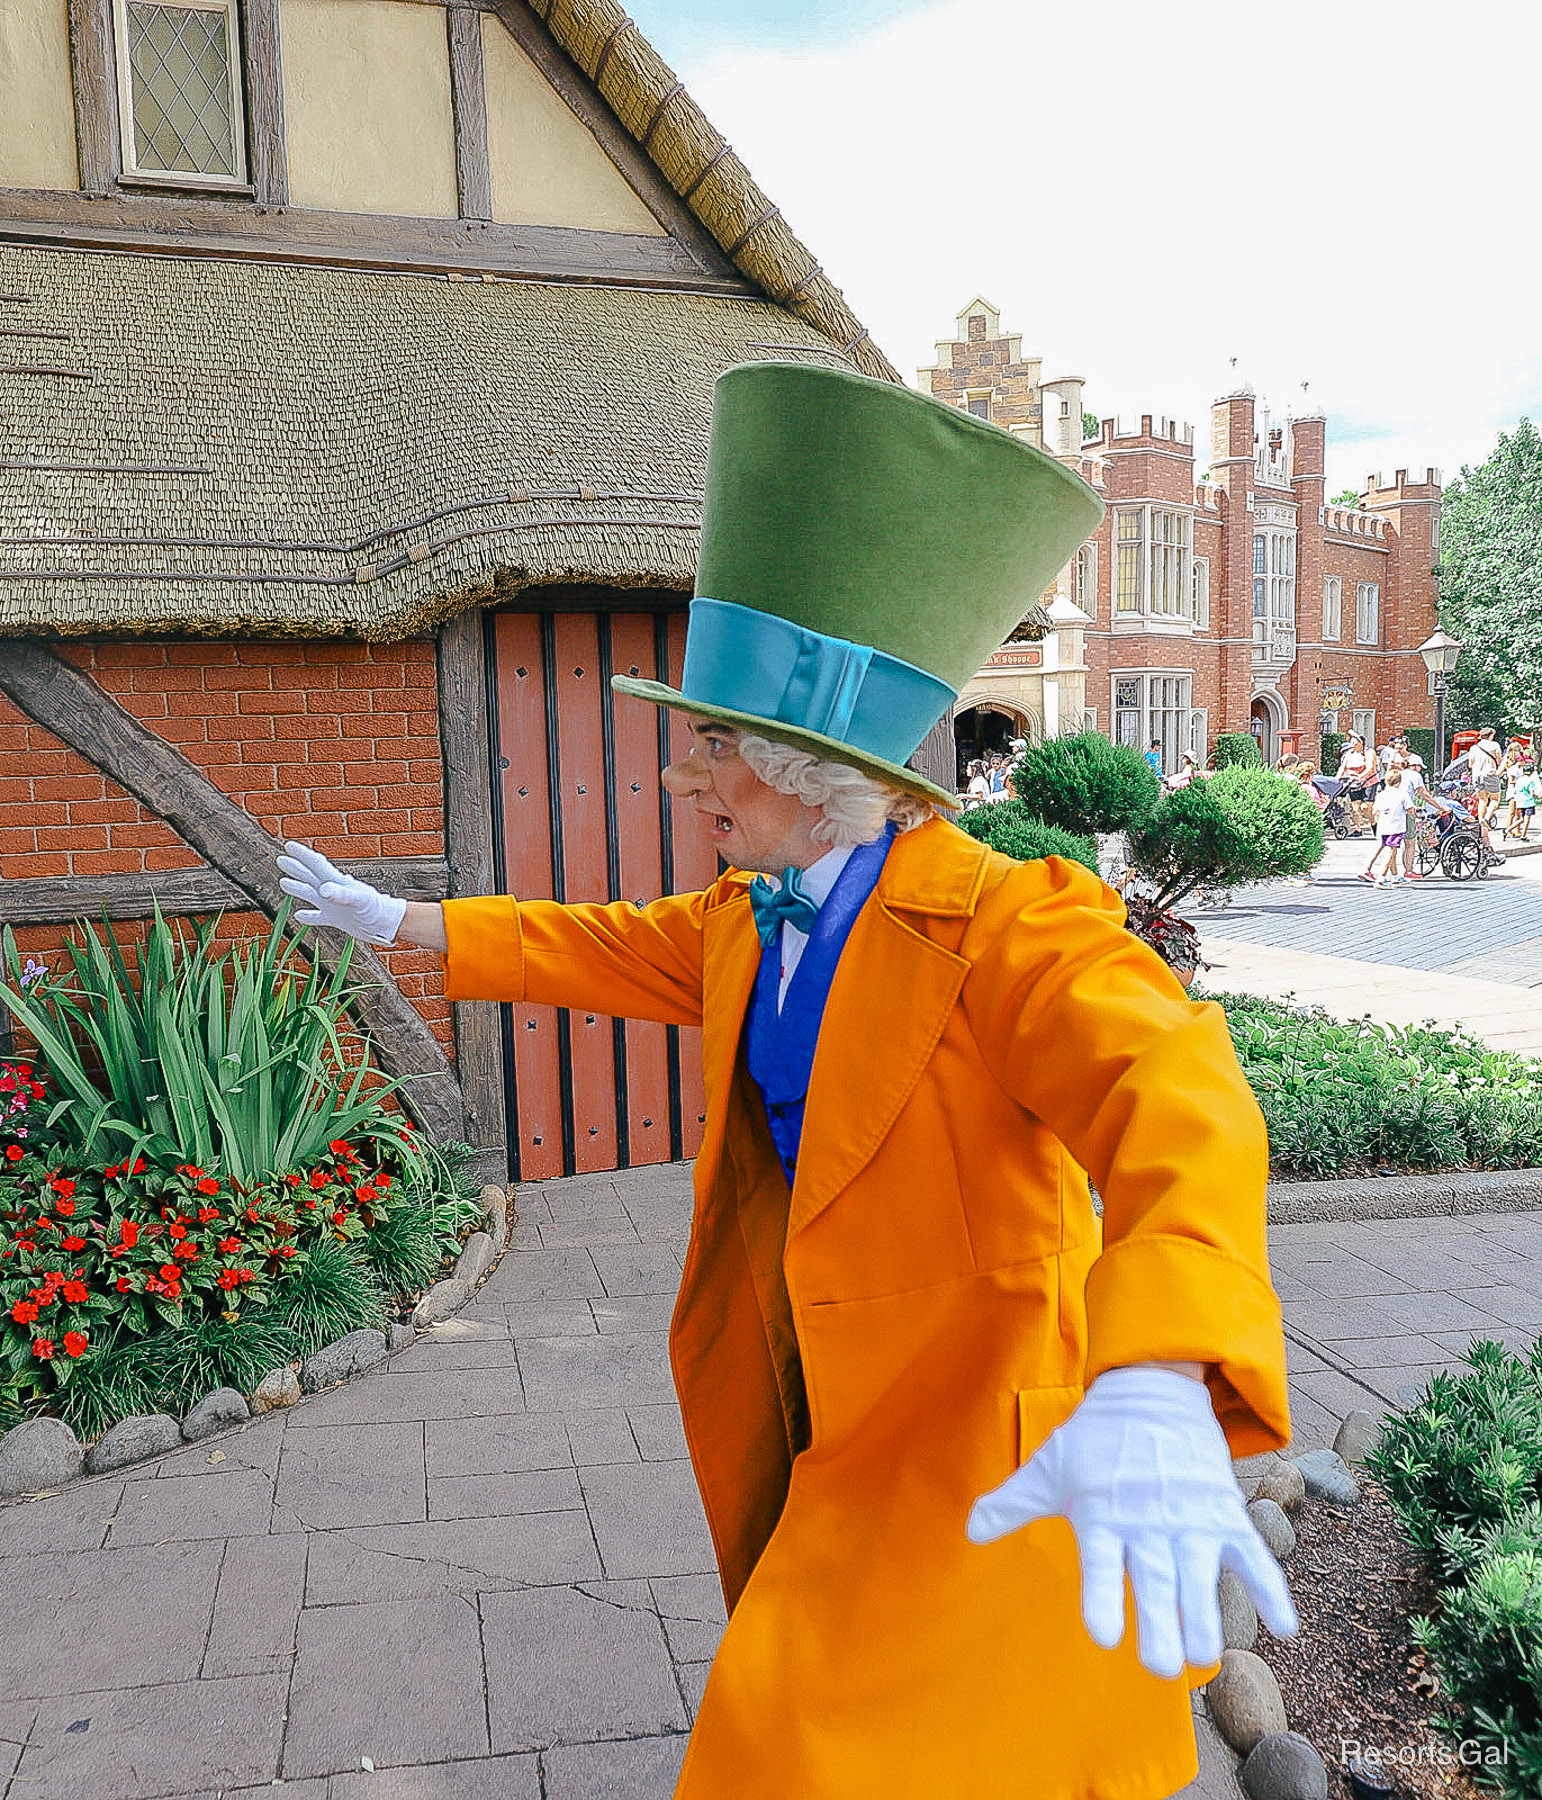 The Mad Hatter freezes when asked for a still shot. 